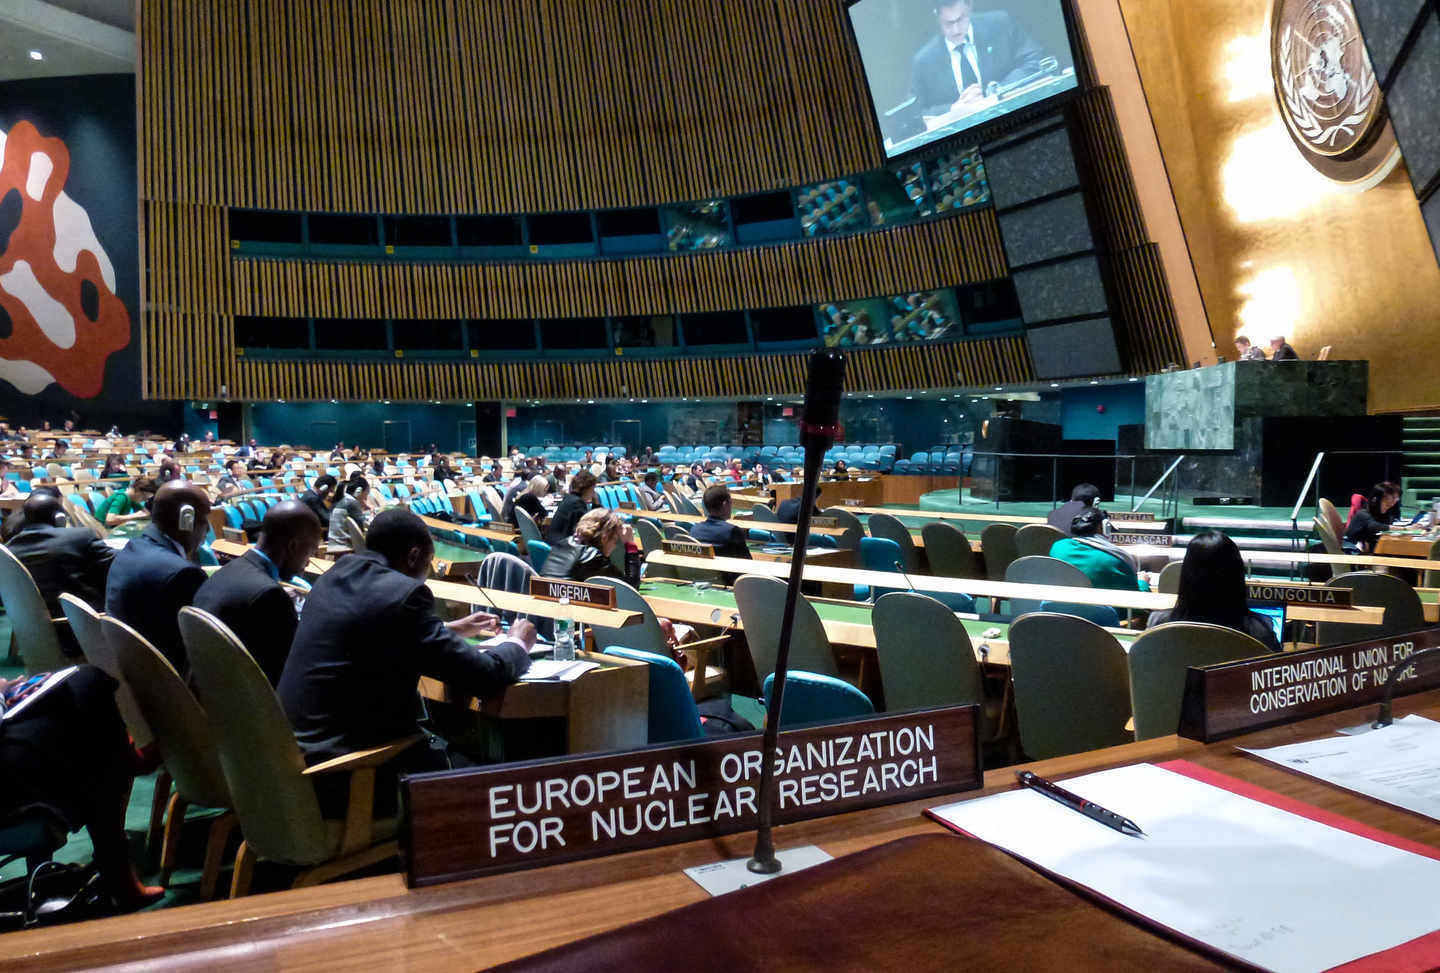 CERN speaks at UN about the laboratory’s cooperation model